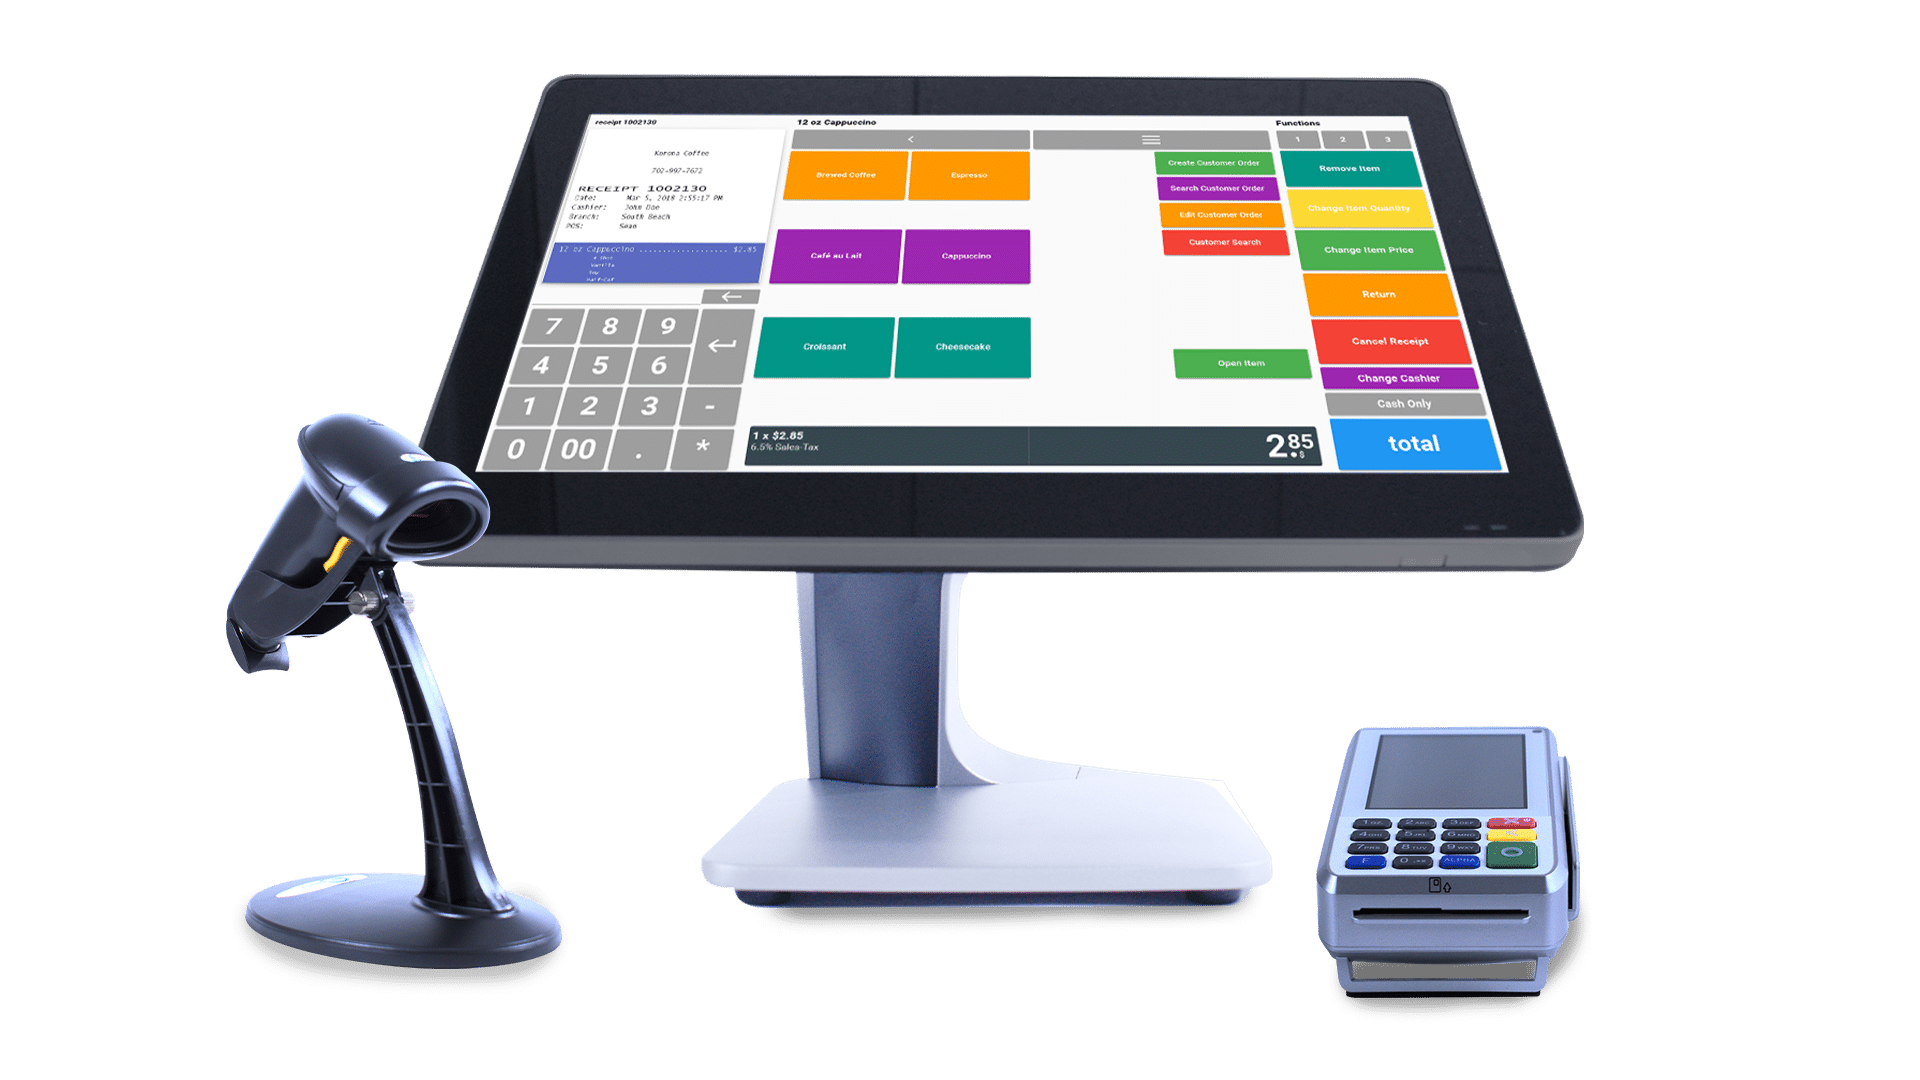 POS desktop terminal with KORONA POS software alongside a barcode scanner and credit card machine